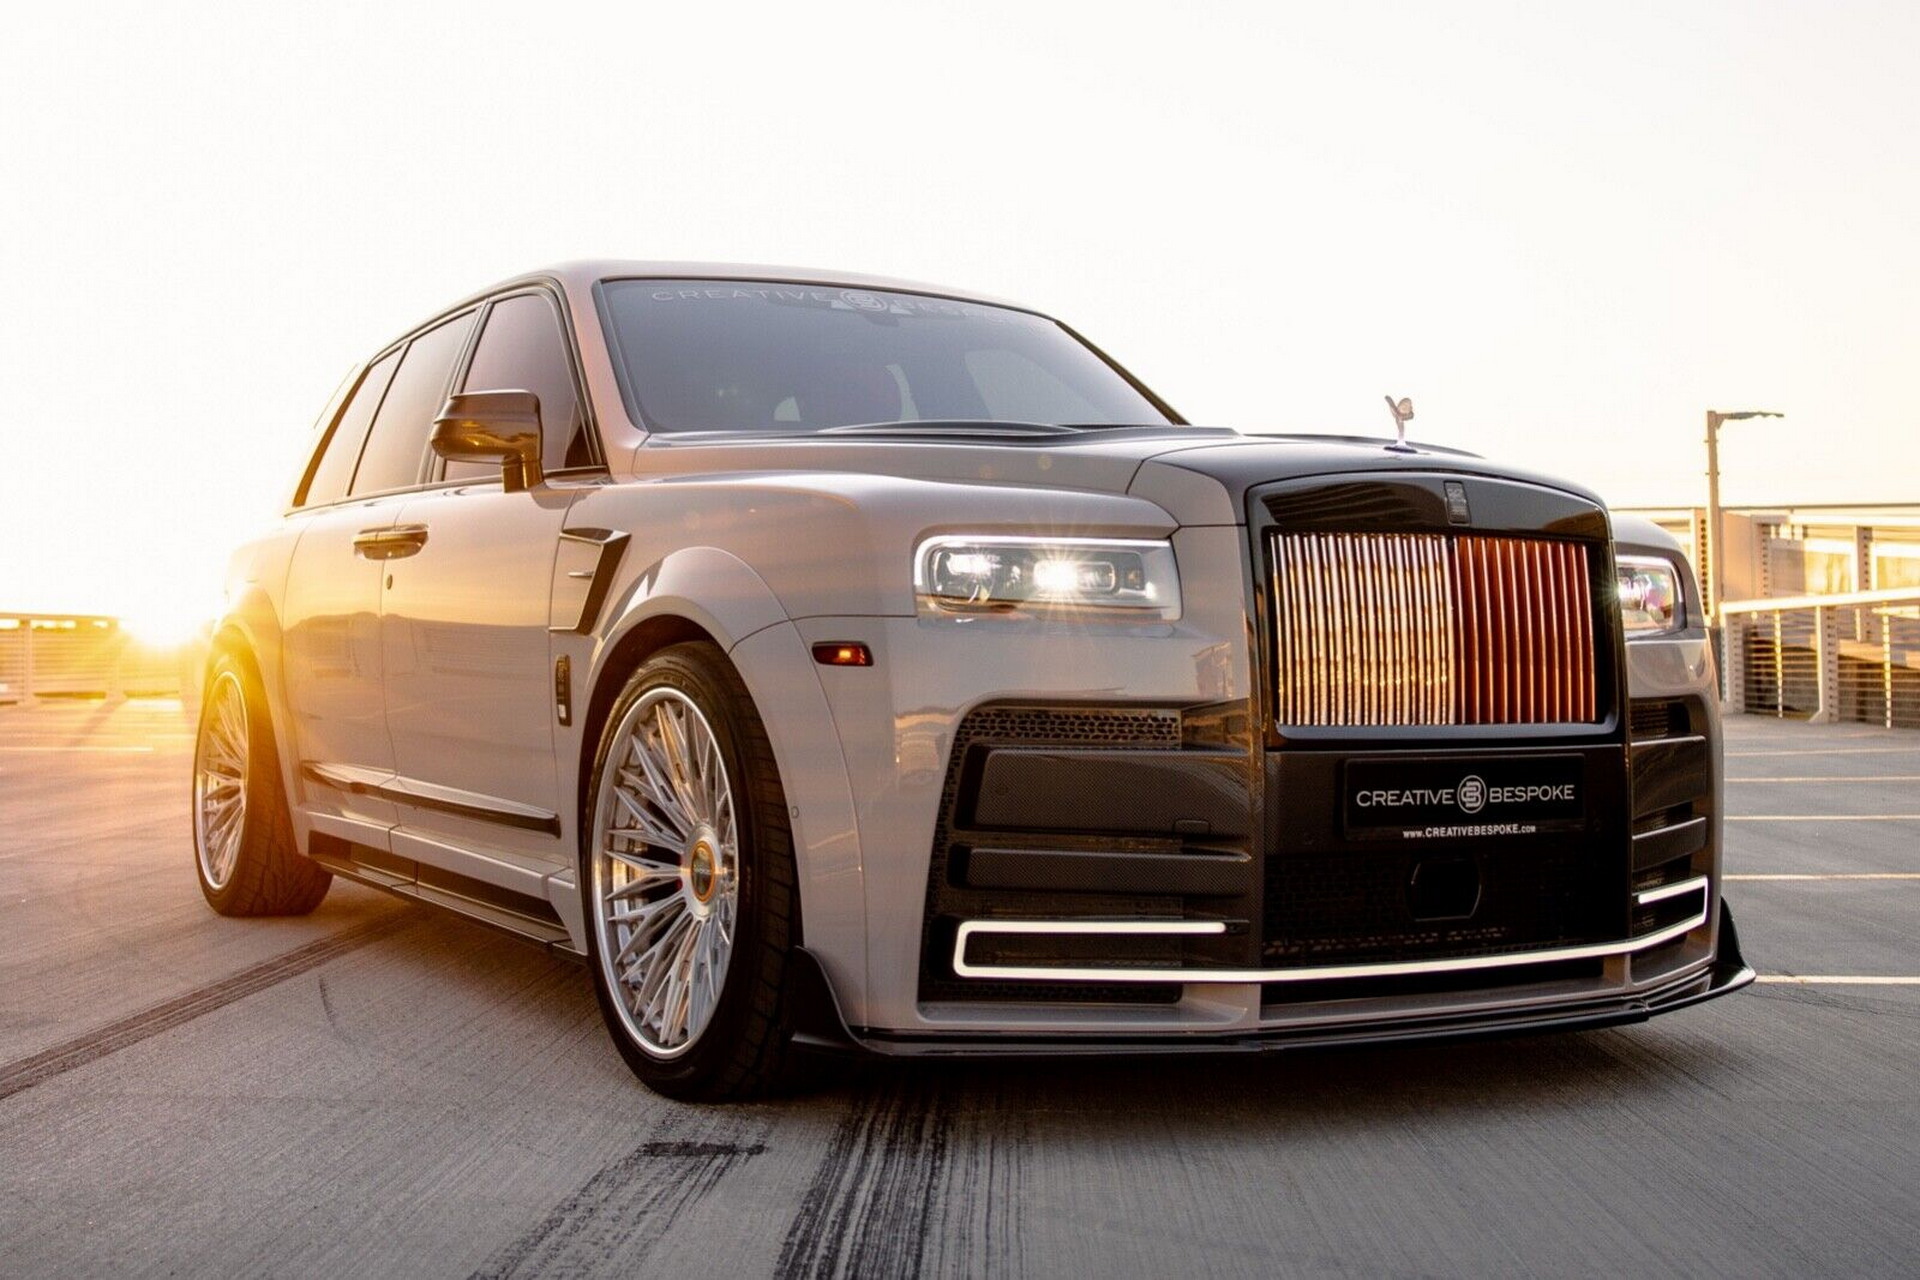 This Custom RollsRoyce Cullinan Comes Complete With AutoZoneStyle